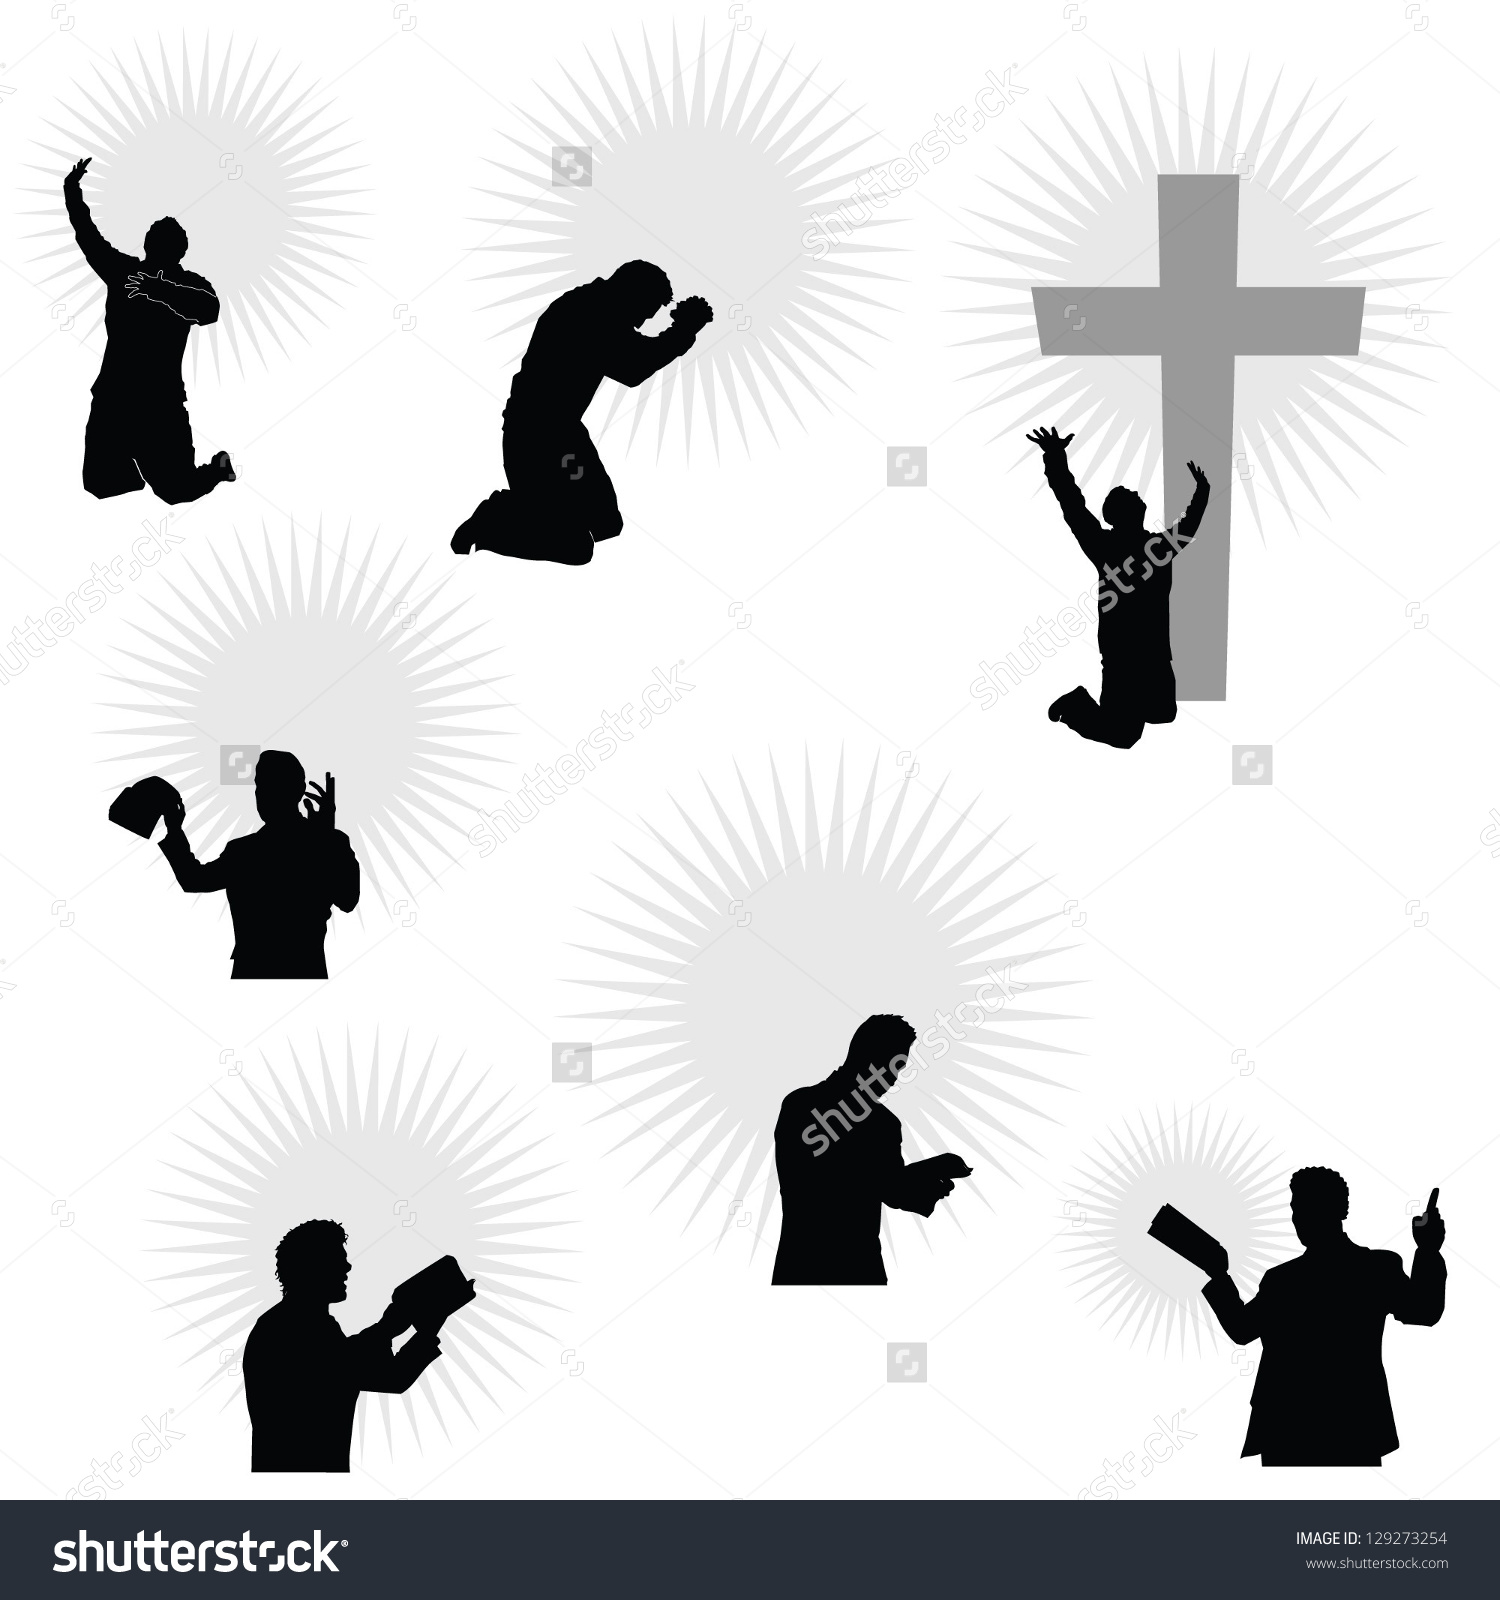 Man On His Knees Praying Holding Stock Vector 129273254.